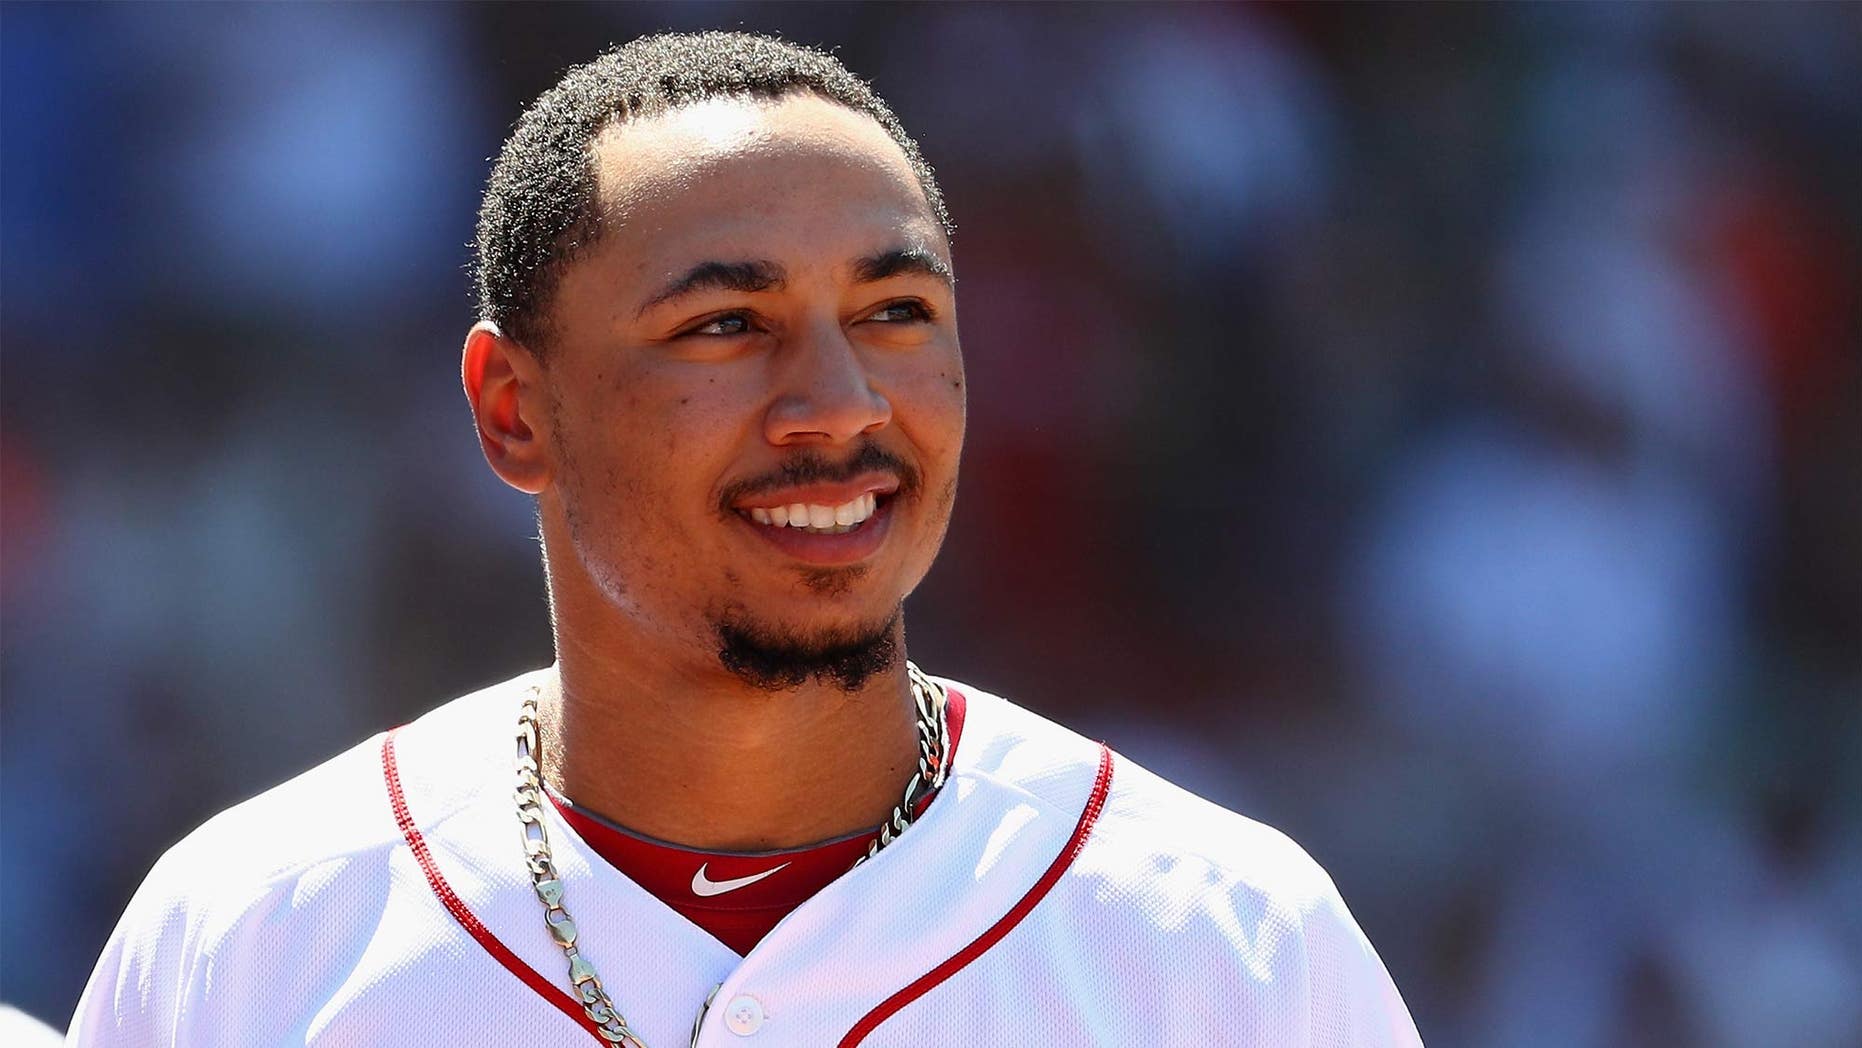 Red Sox star Mookie Betts, the AL MVP, will not go to the White House